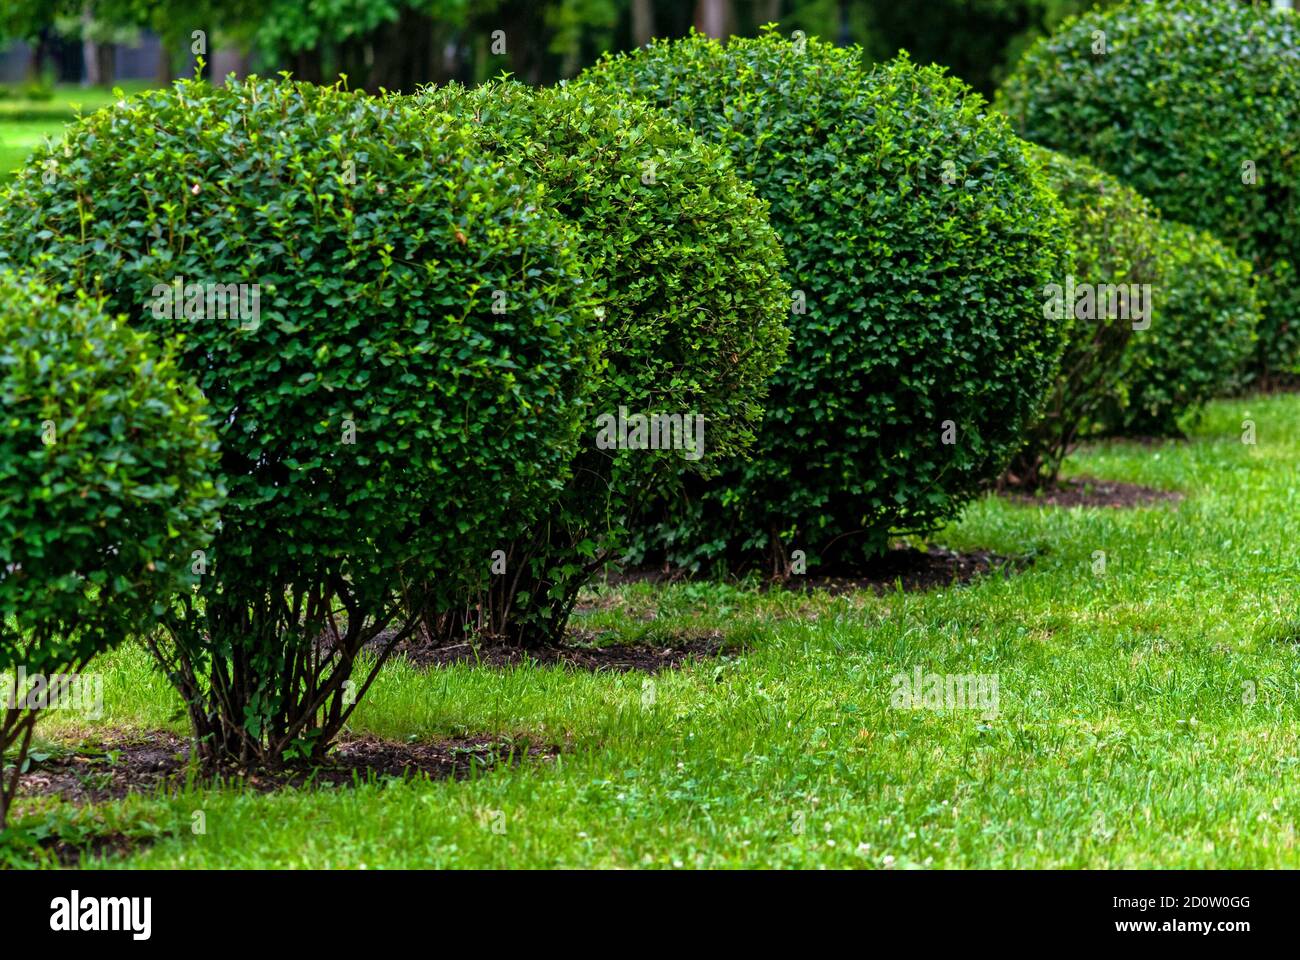 bushes trimmed into balls in the city park, the topiary art Stock Photo